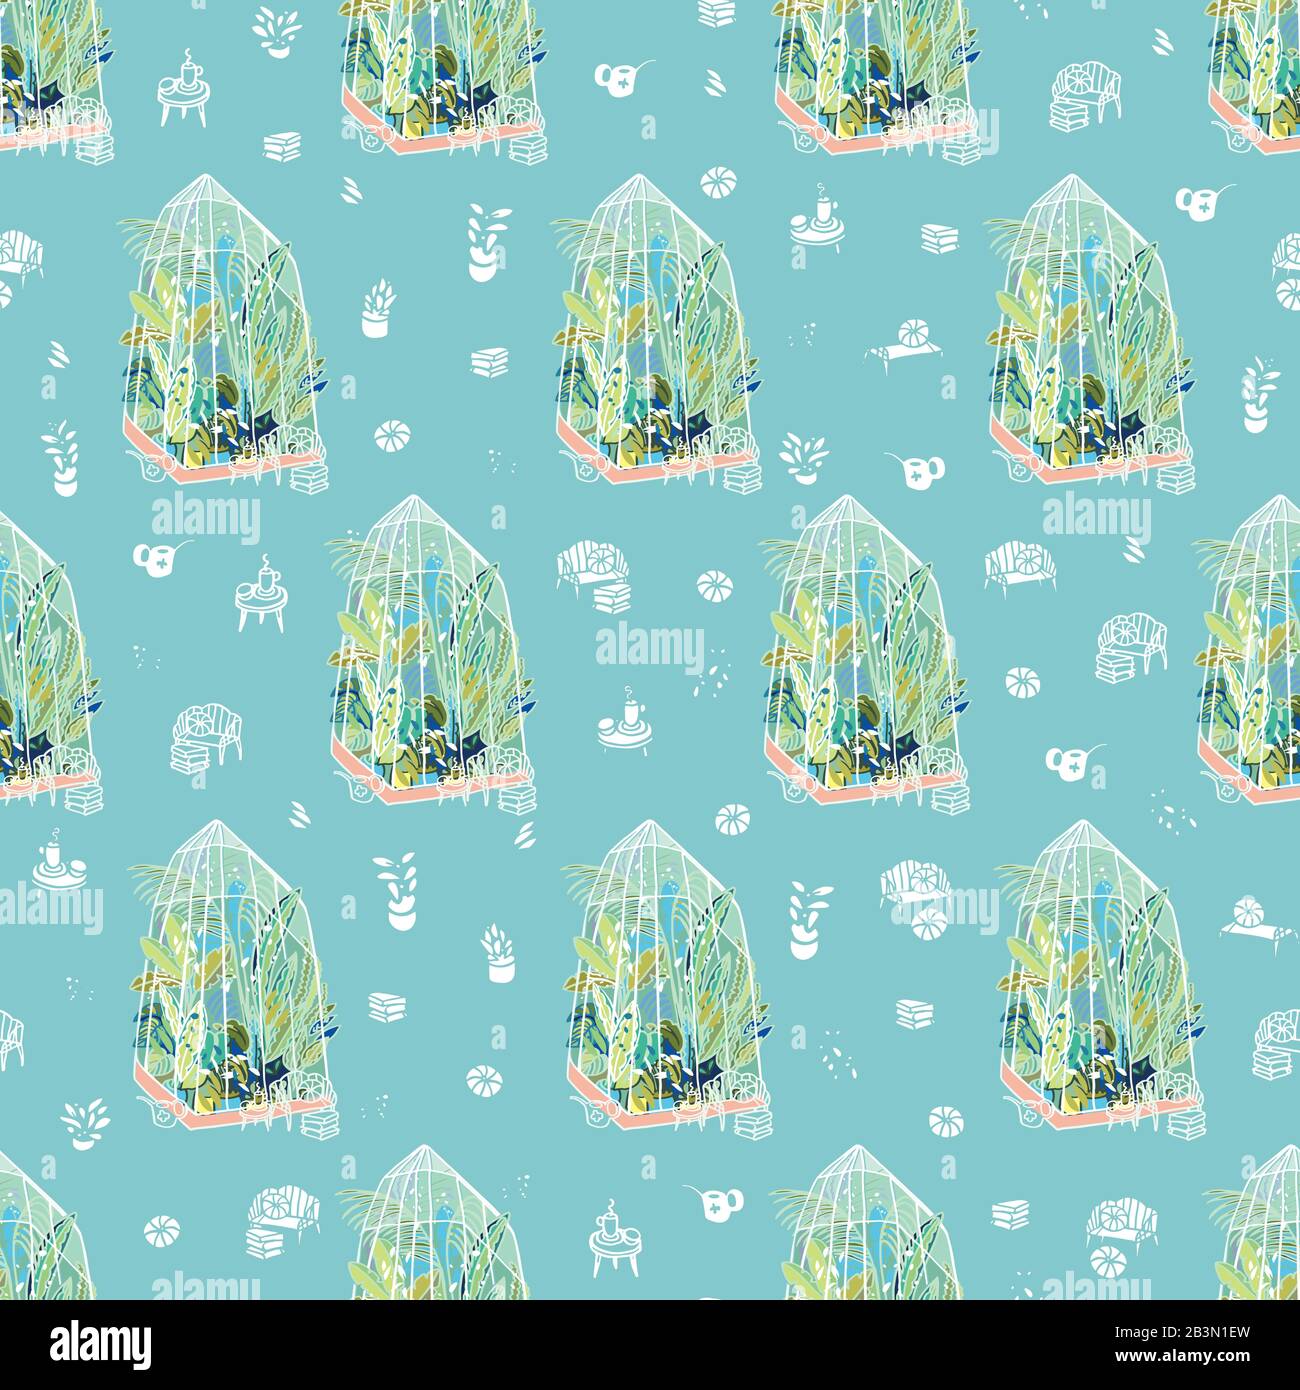 Vector hygge lifestyle exotic greenhouse halfdrop pattern with plants, glasshouse, garden utensil on blue background. Happy cozy tropical plant design. Perfect for garden and plant lovers. Stock Vector